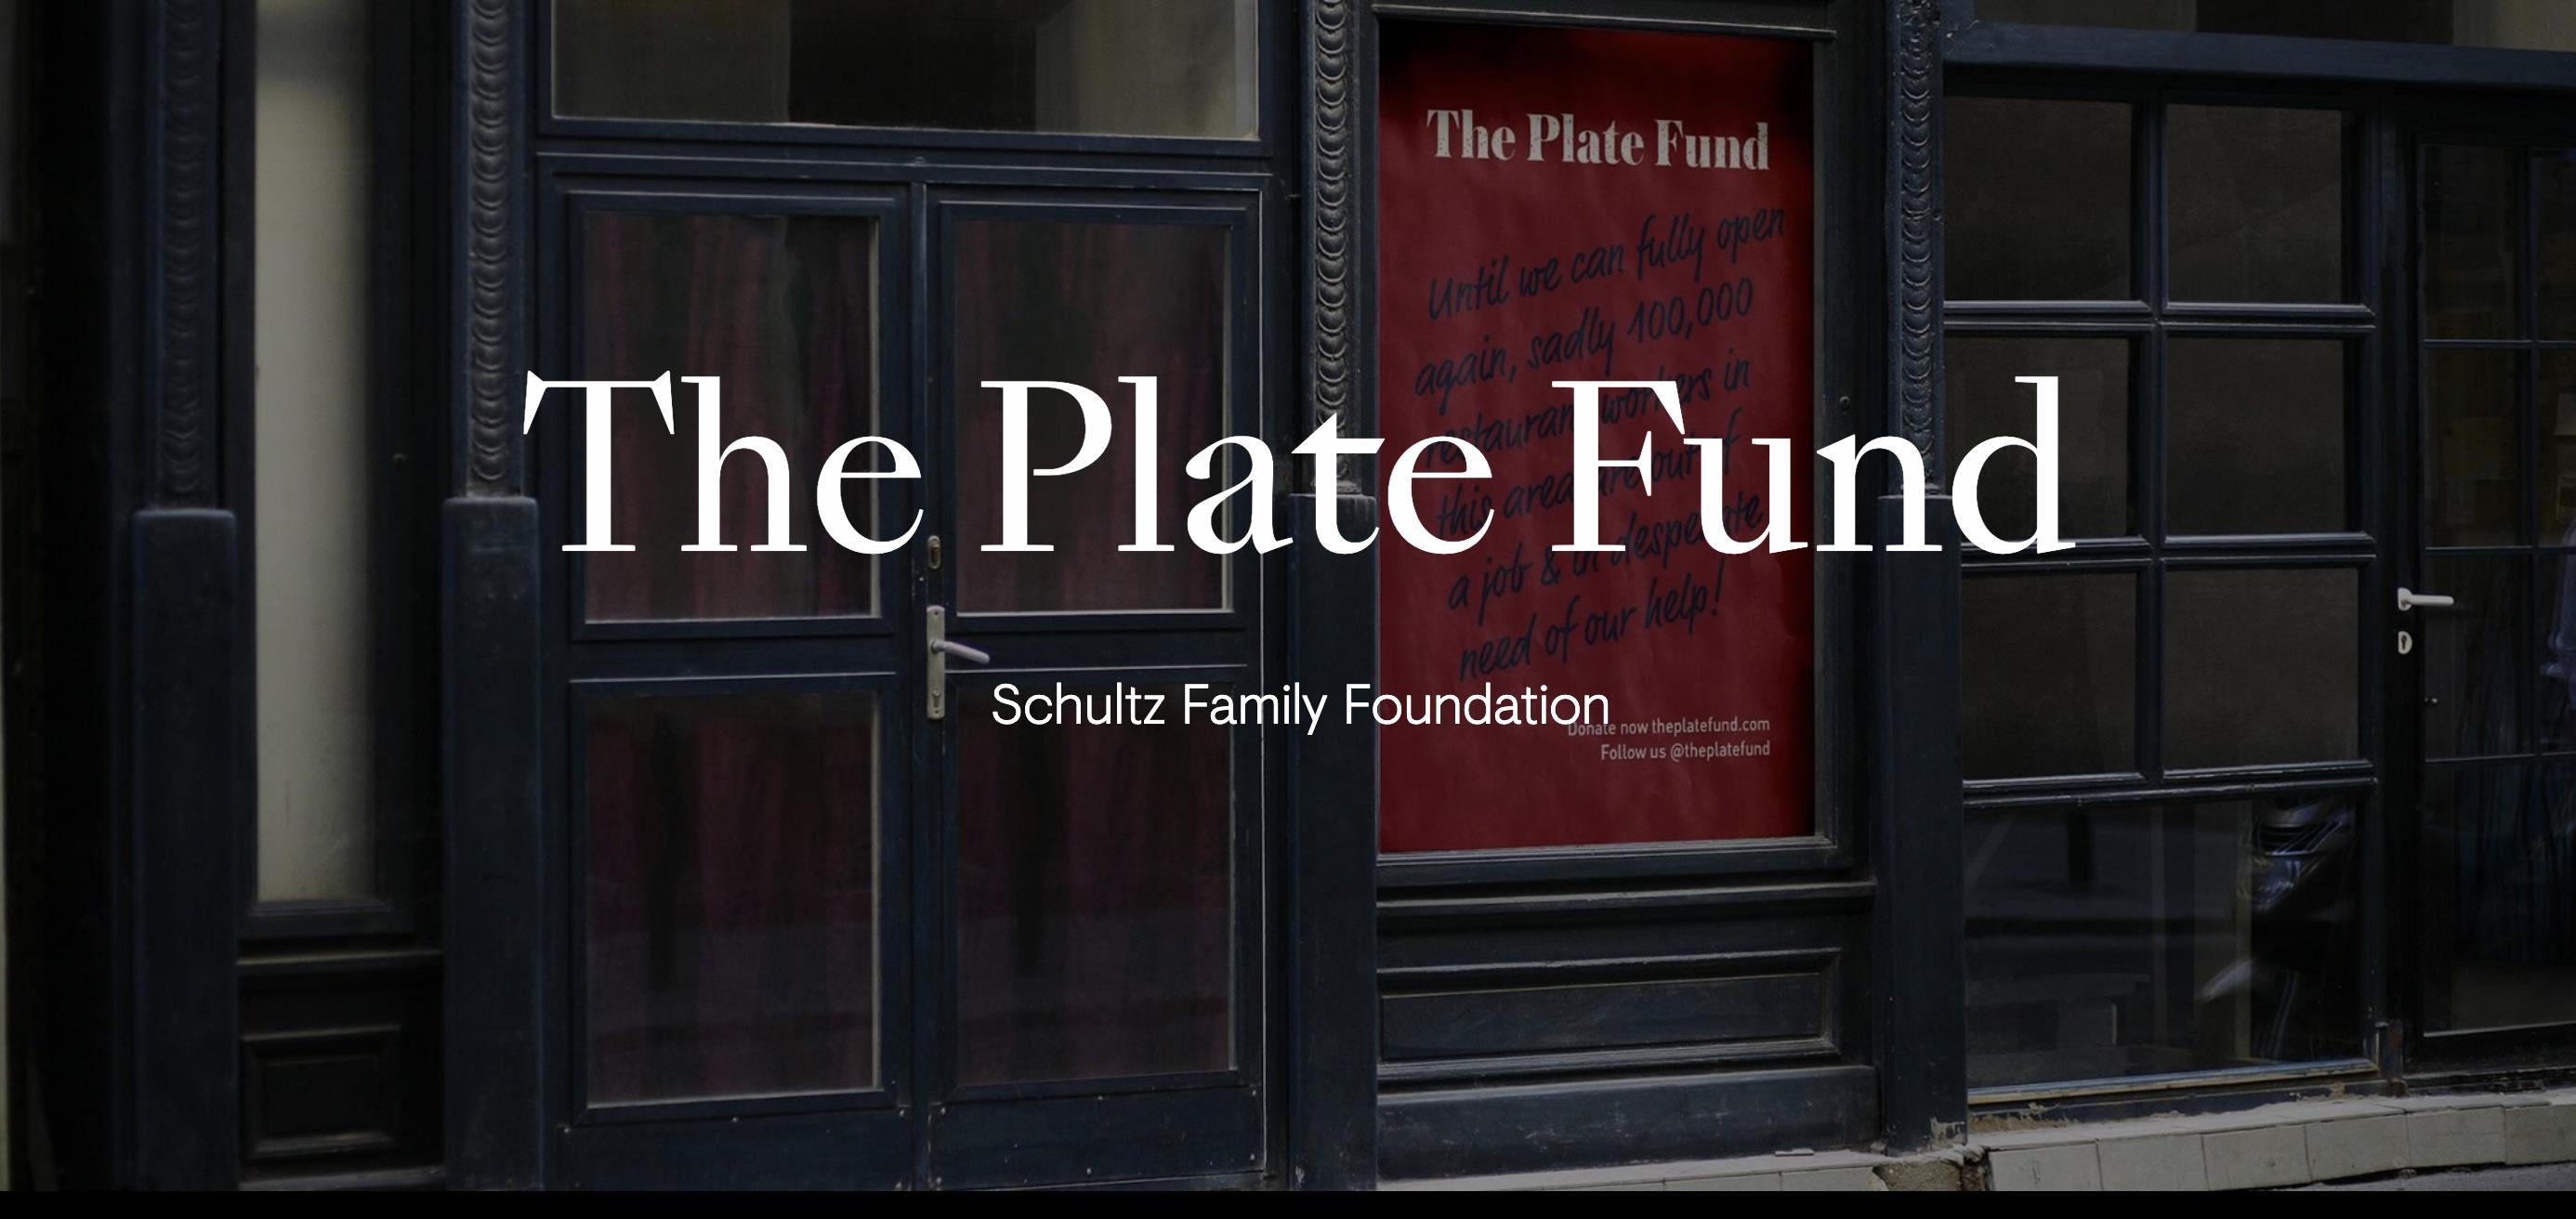 Schultz Family Foundation - The Plate Fund